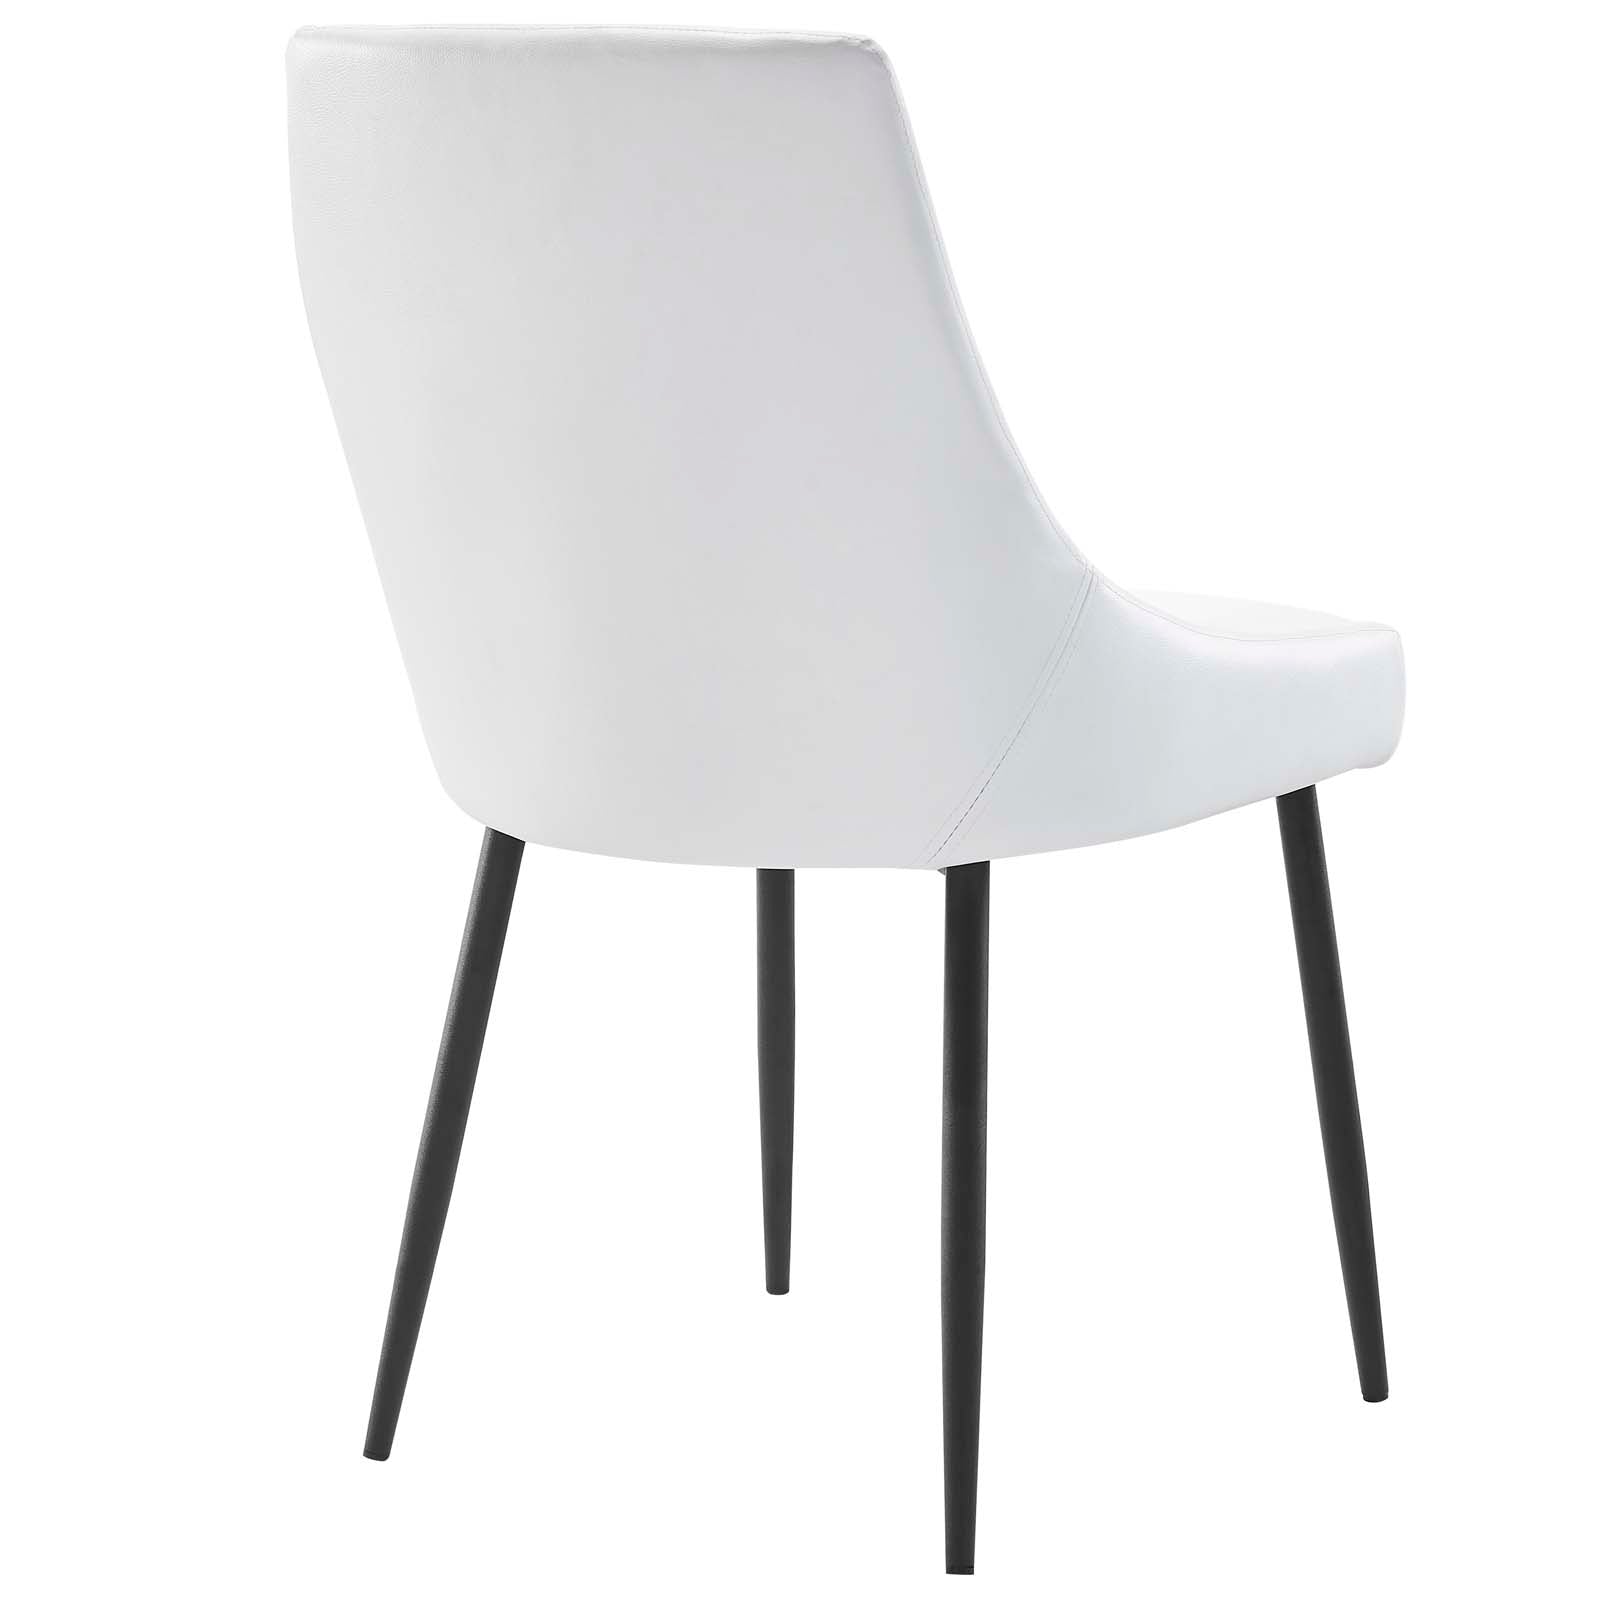 Modway Dining Chairs - Viscount Vegan Leather Dining Chairs - Set Of 2 Black White